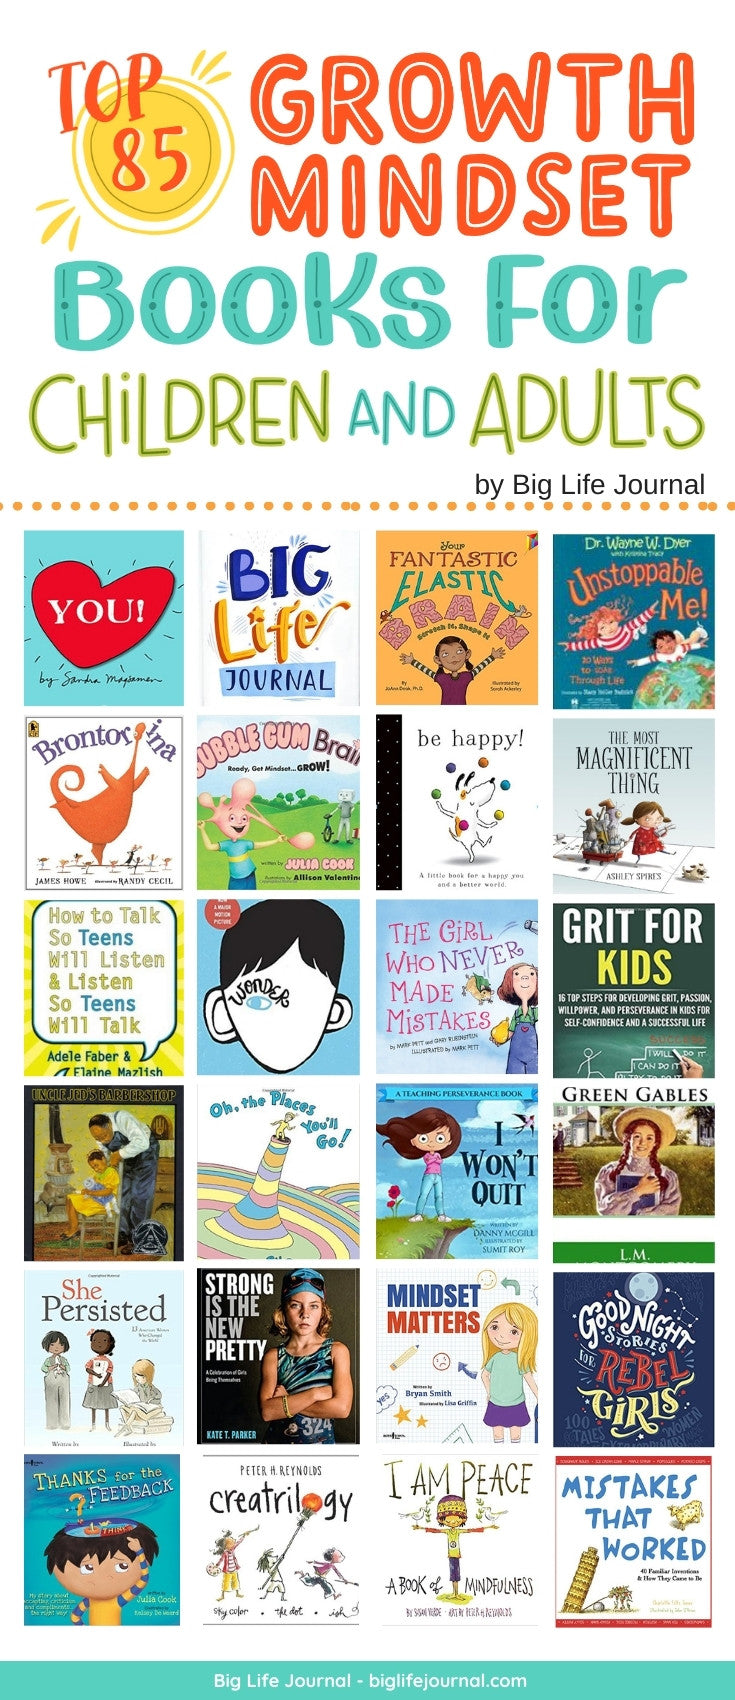 Top 85 Growth Mindset Books for Kids & Adults | Big Life Journal